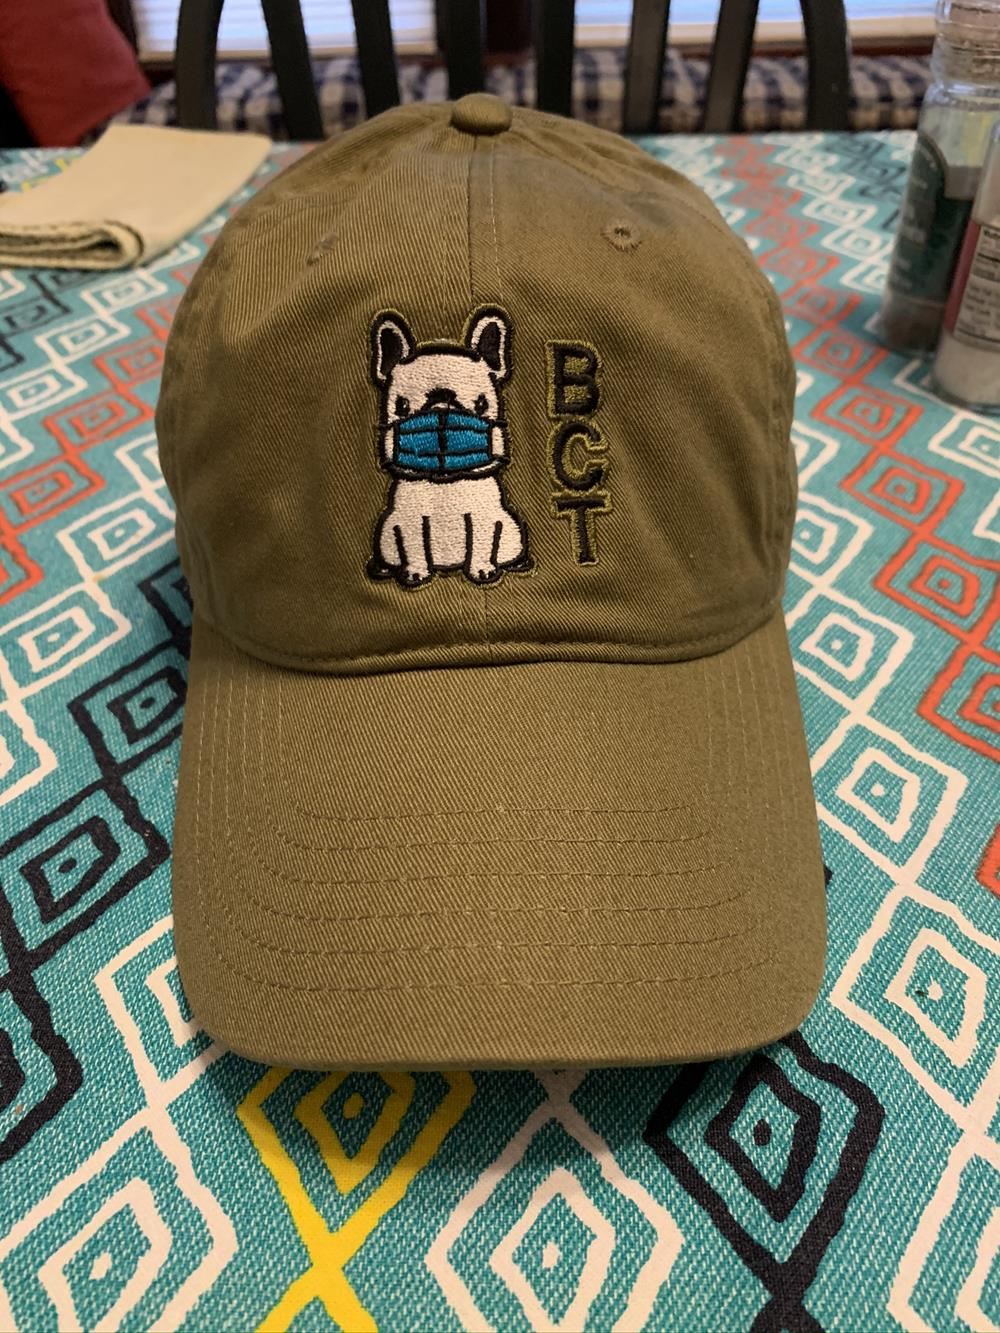 a green hat with a dog on it